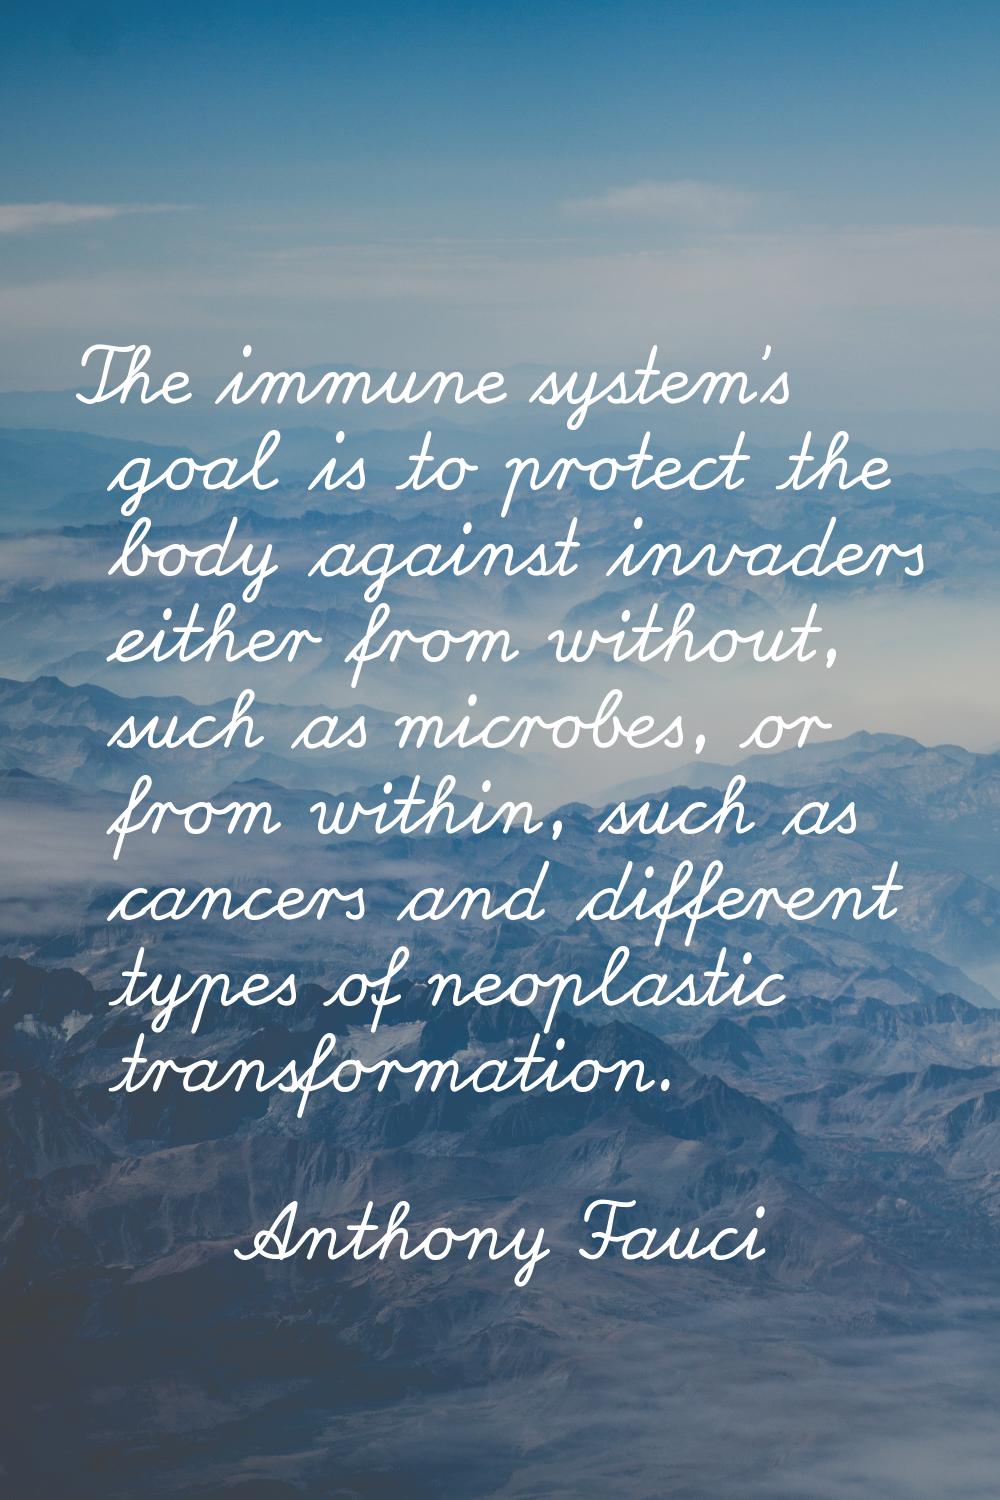 The immune system's goal is to protect the body against invaders either from without, such as micro